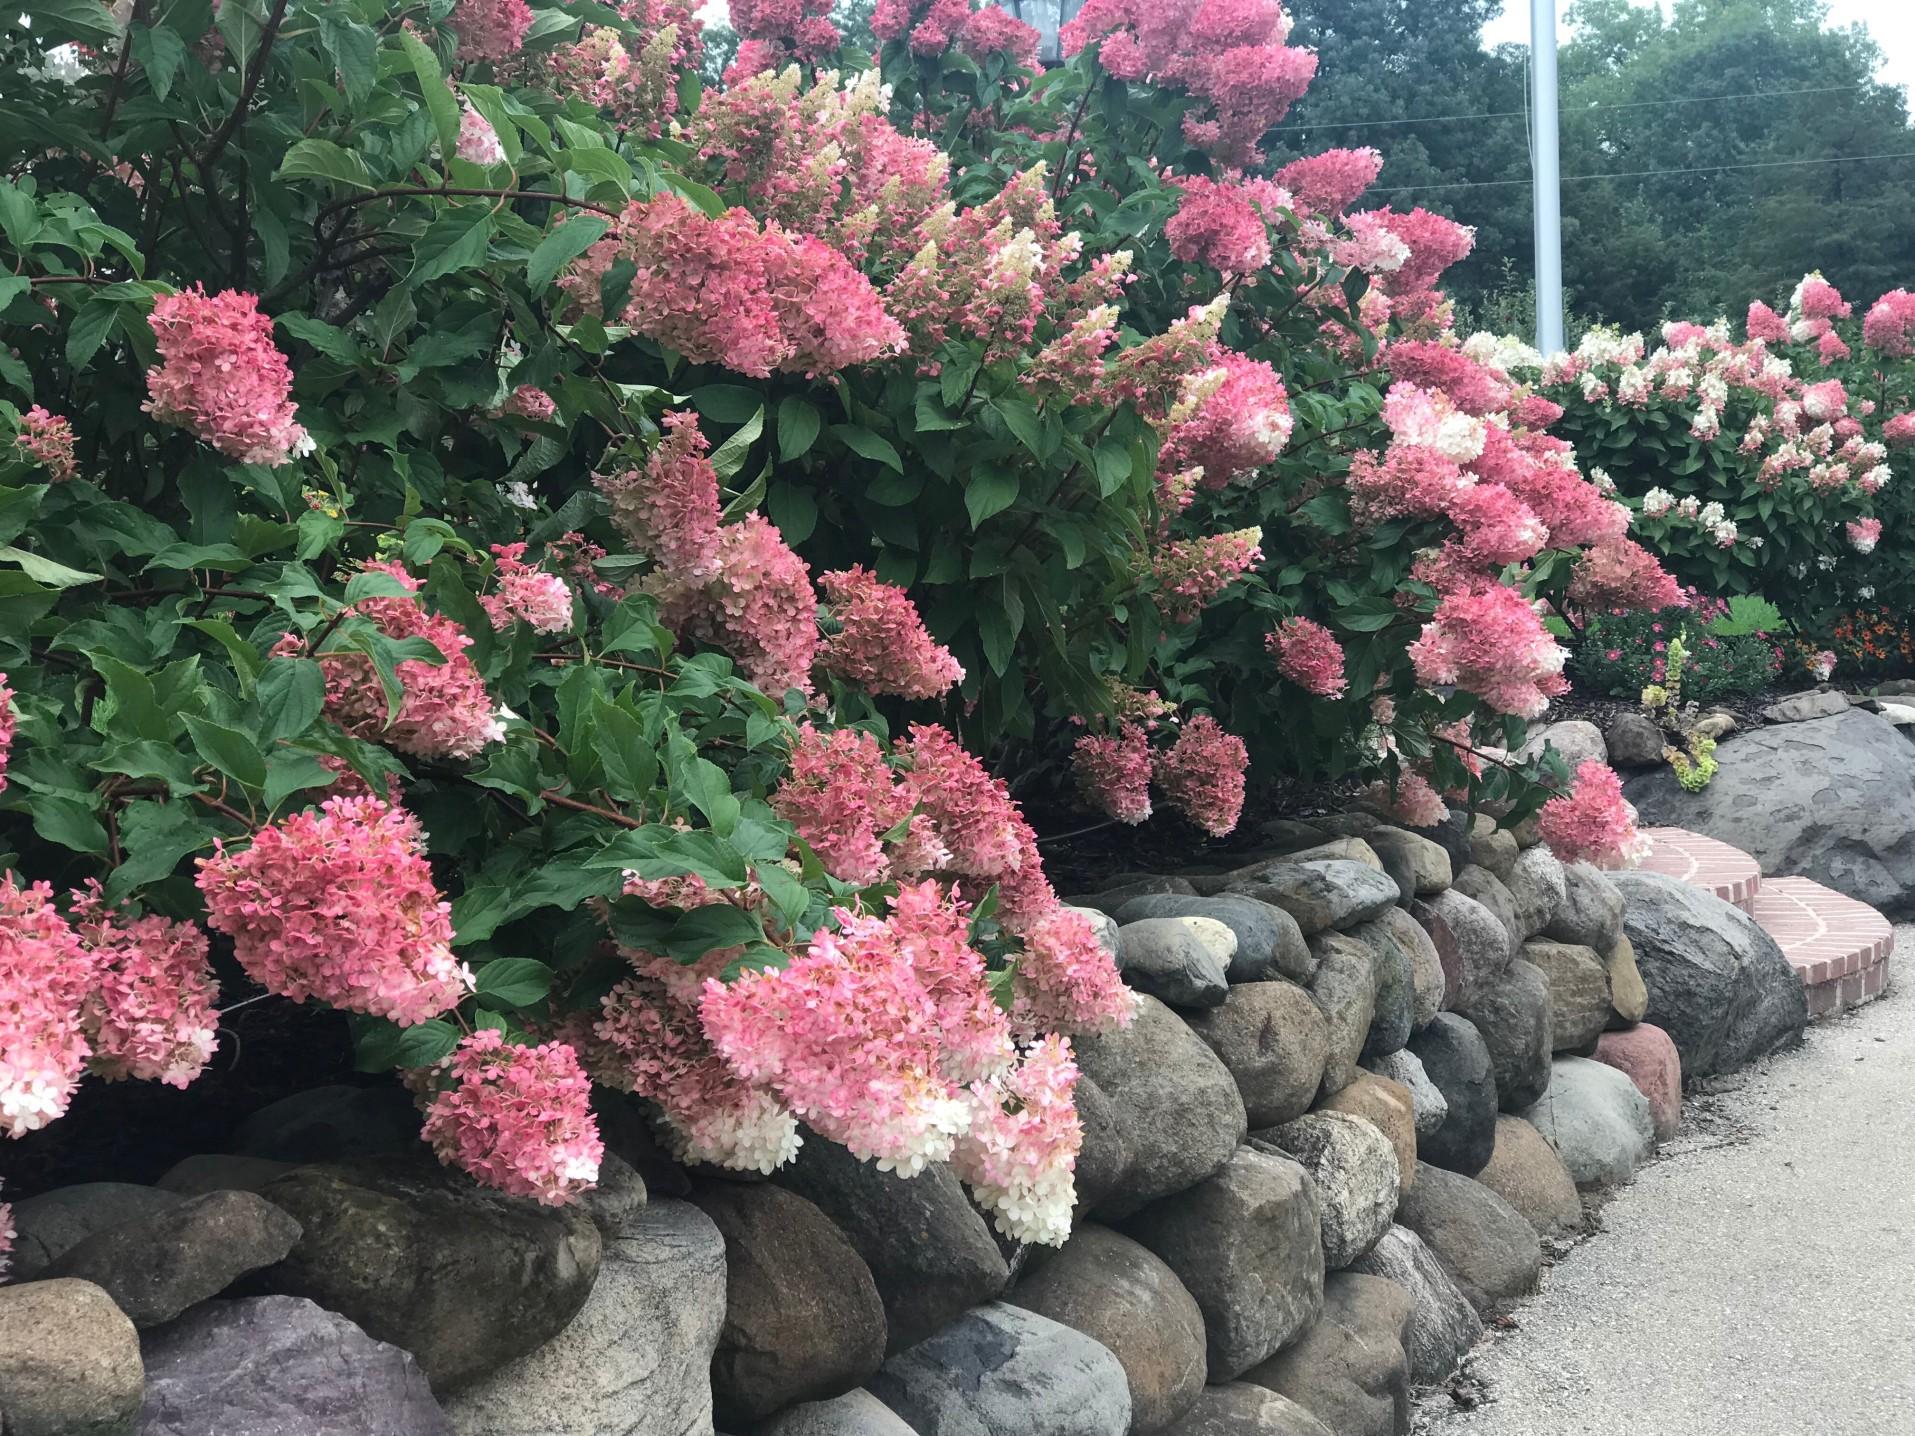 A low rock retaining wall beneath lush pink flower bushes.